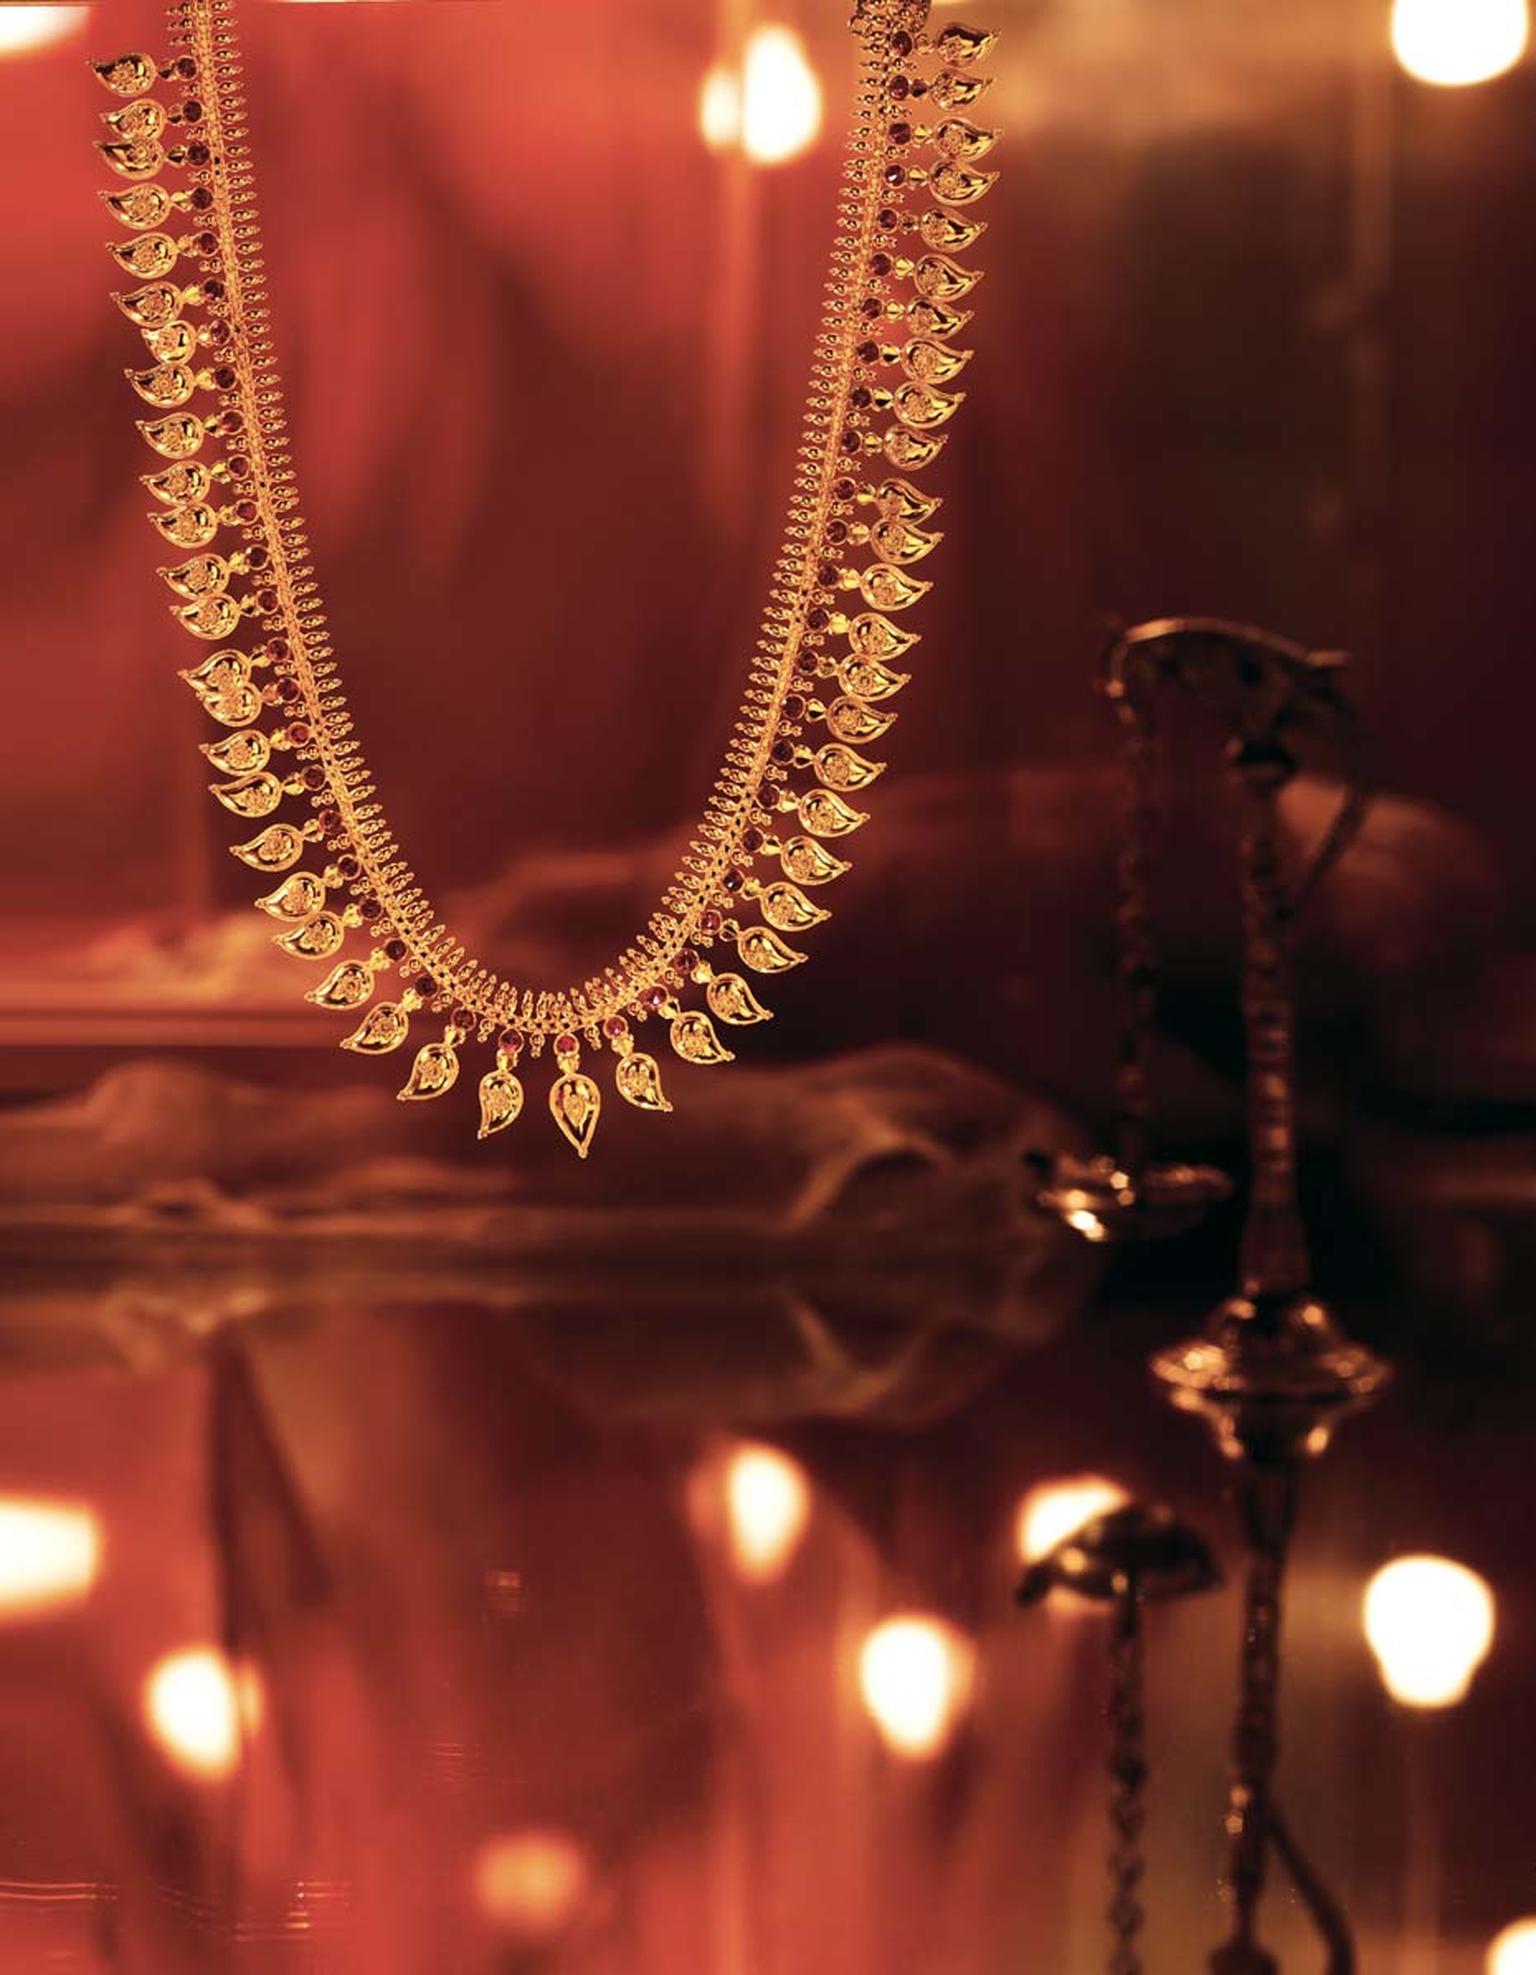 Tanishq manga-mala (garland of mangoes) necklace in yellow gold, from the wedding jewellery collection.